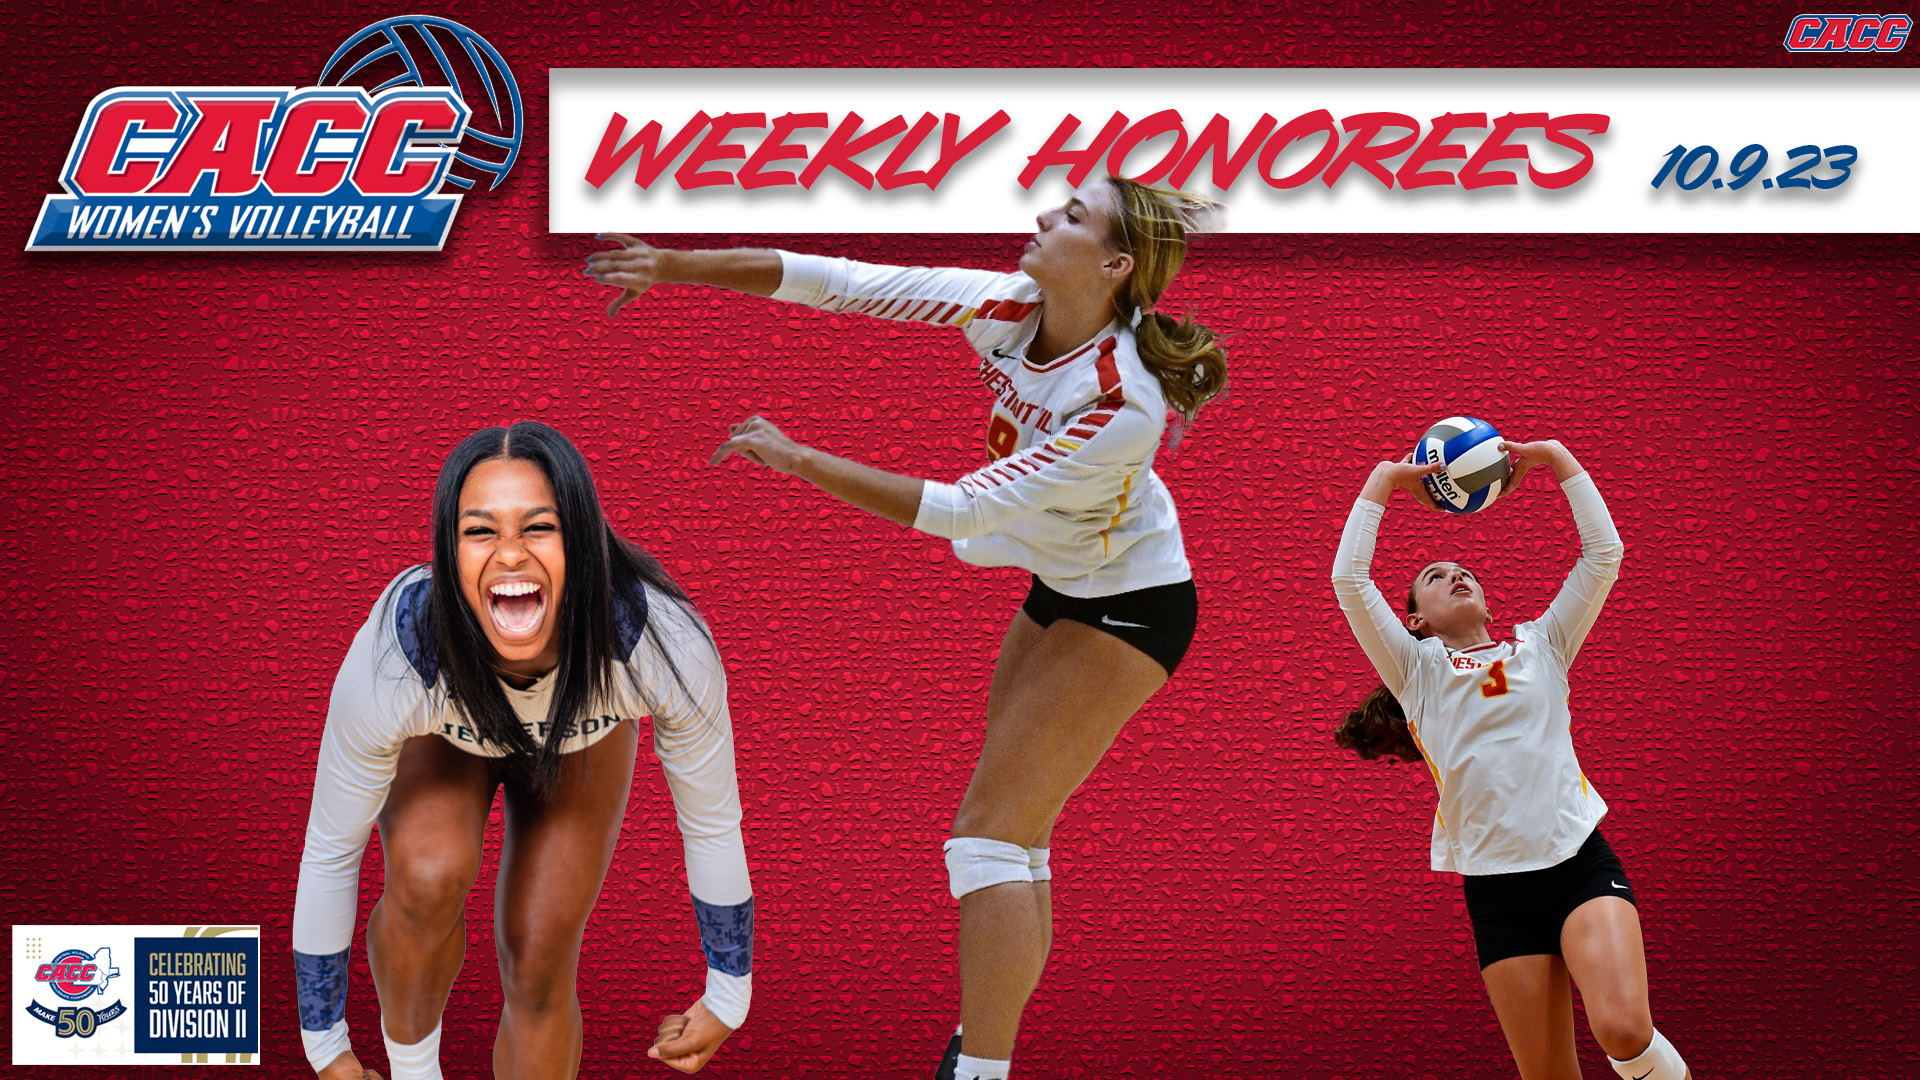 CACC Women's Volleyball Weekly Honorees (10-9-23)